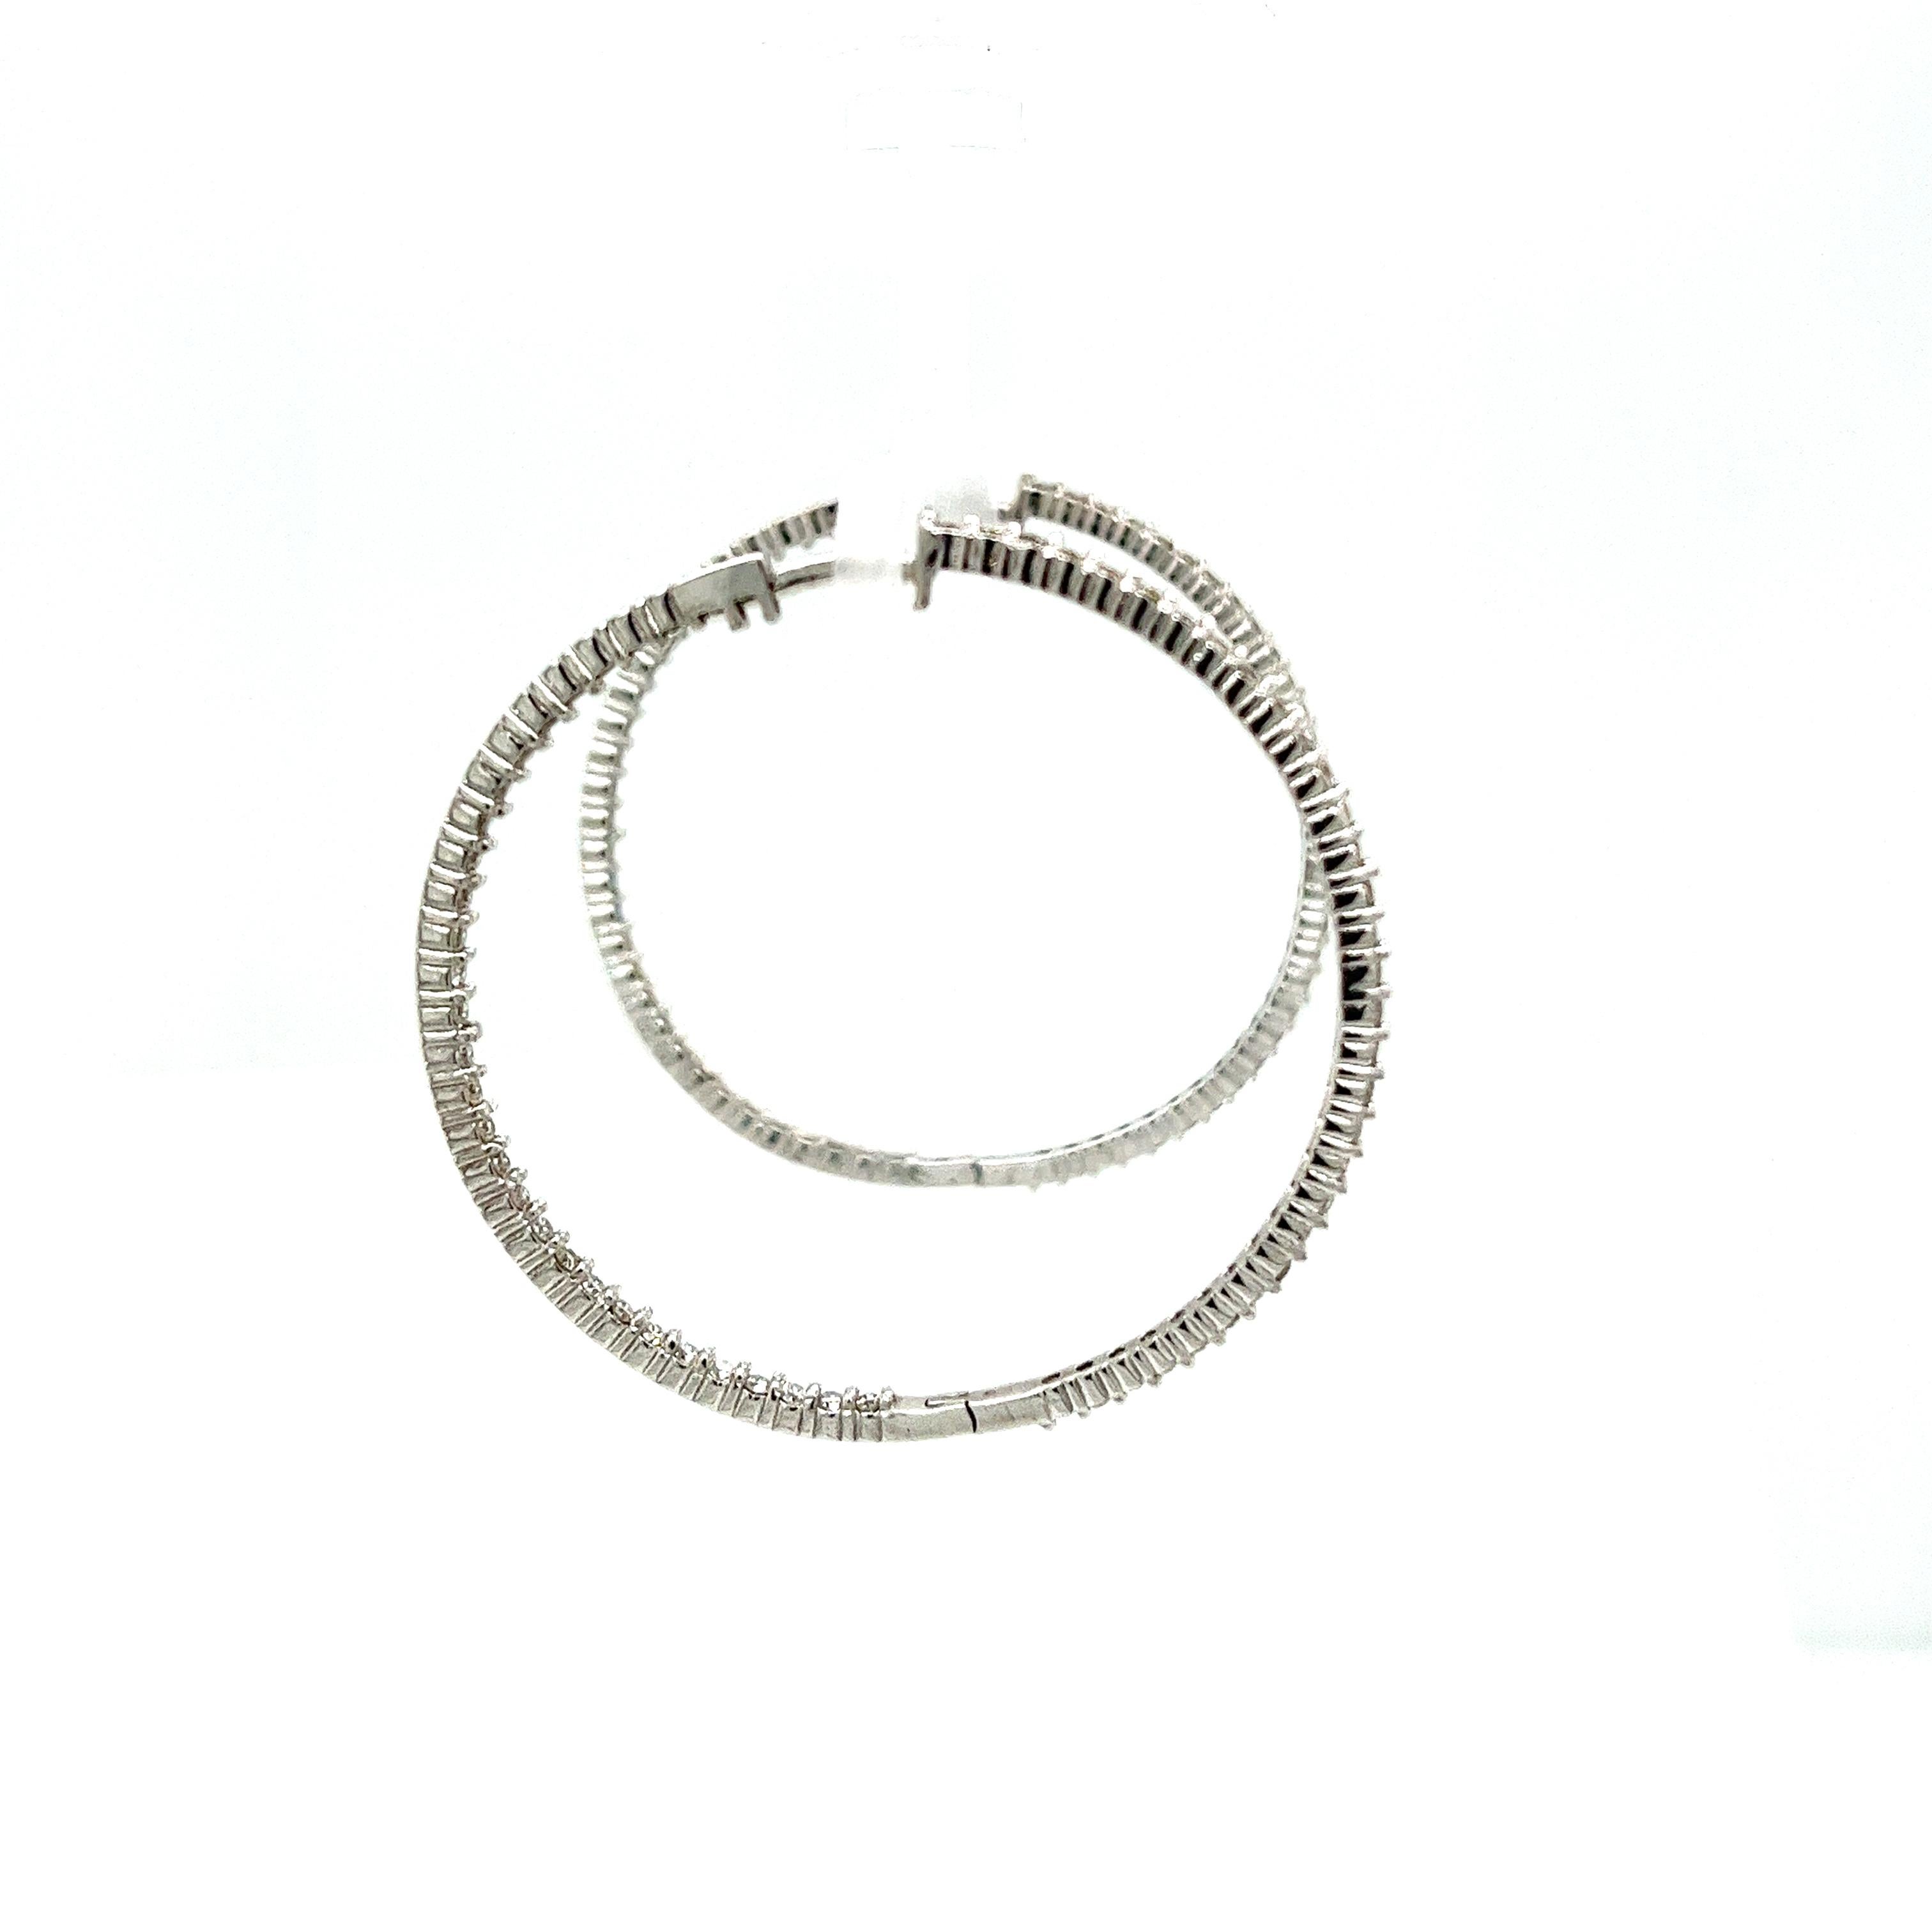 New Fine Quality Hoop Earrings Set with 2.75ct of Diamonds in 18ct White Gold In New Condition For Sale In London, GB